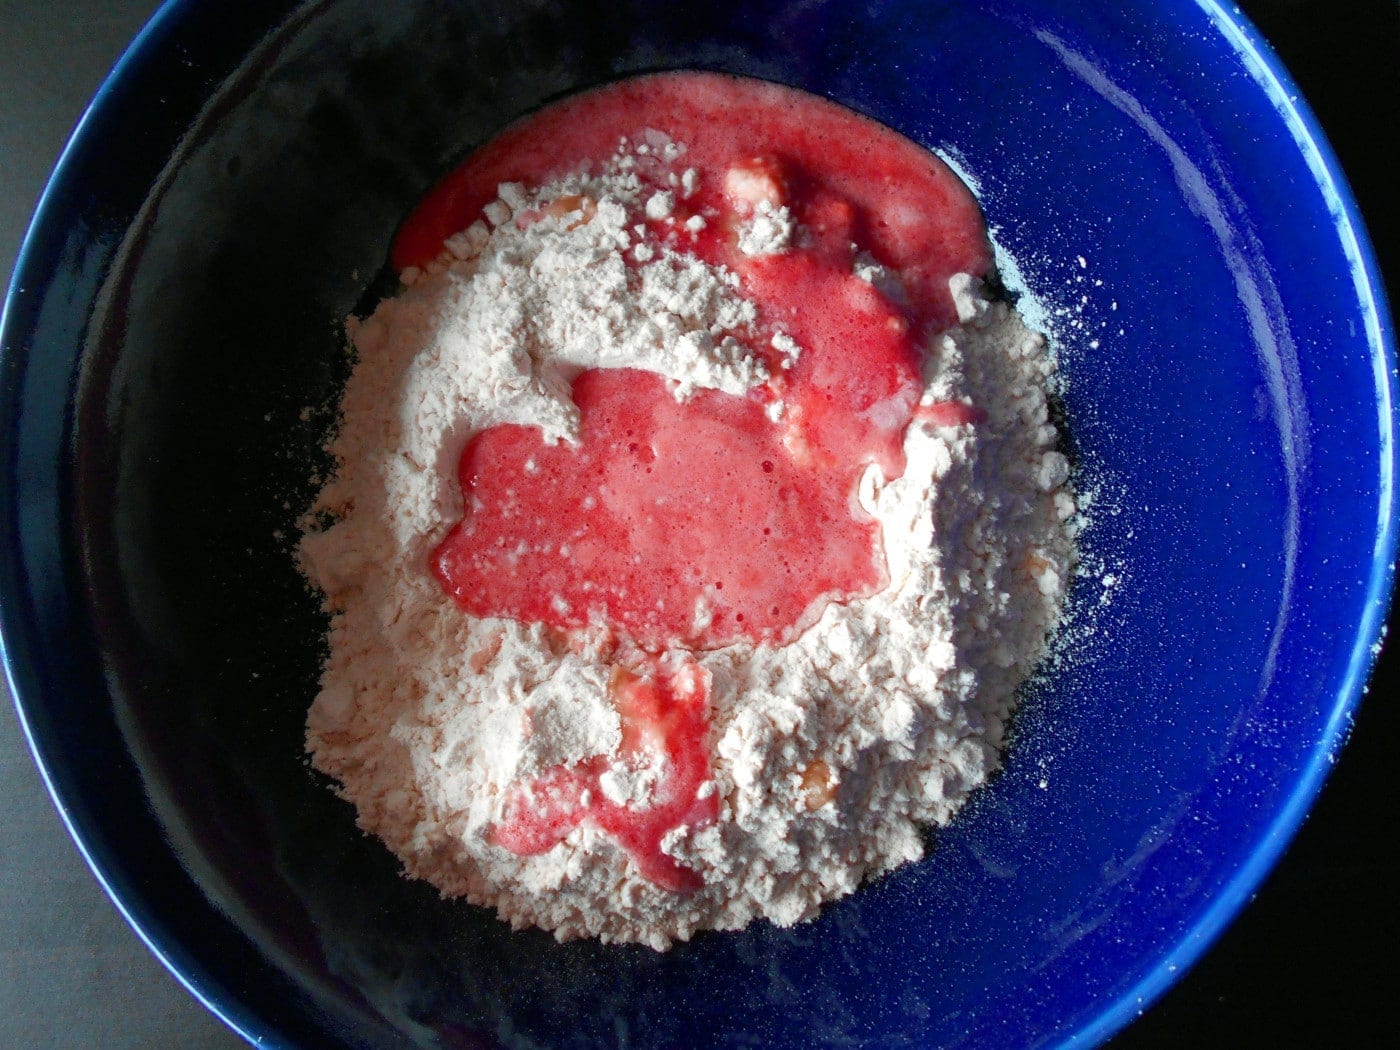 Overhead view of a blue bowl filled with flour and pureed tomato